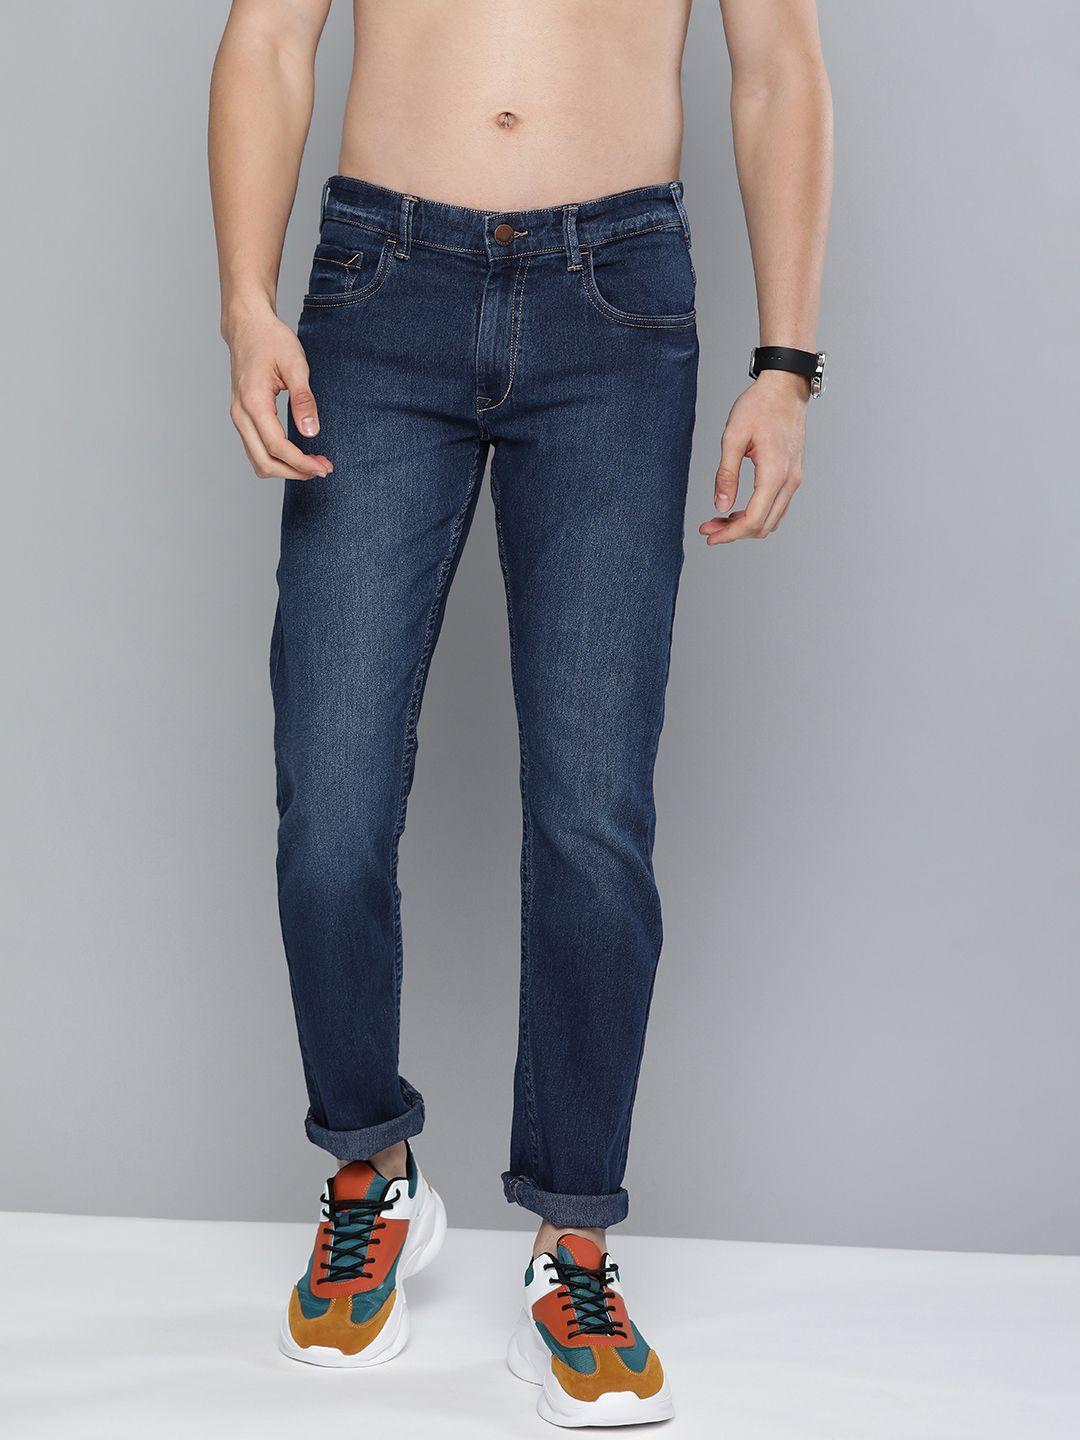 here&now men indigo light fade stretchable casual jeans